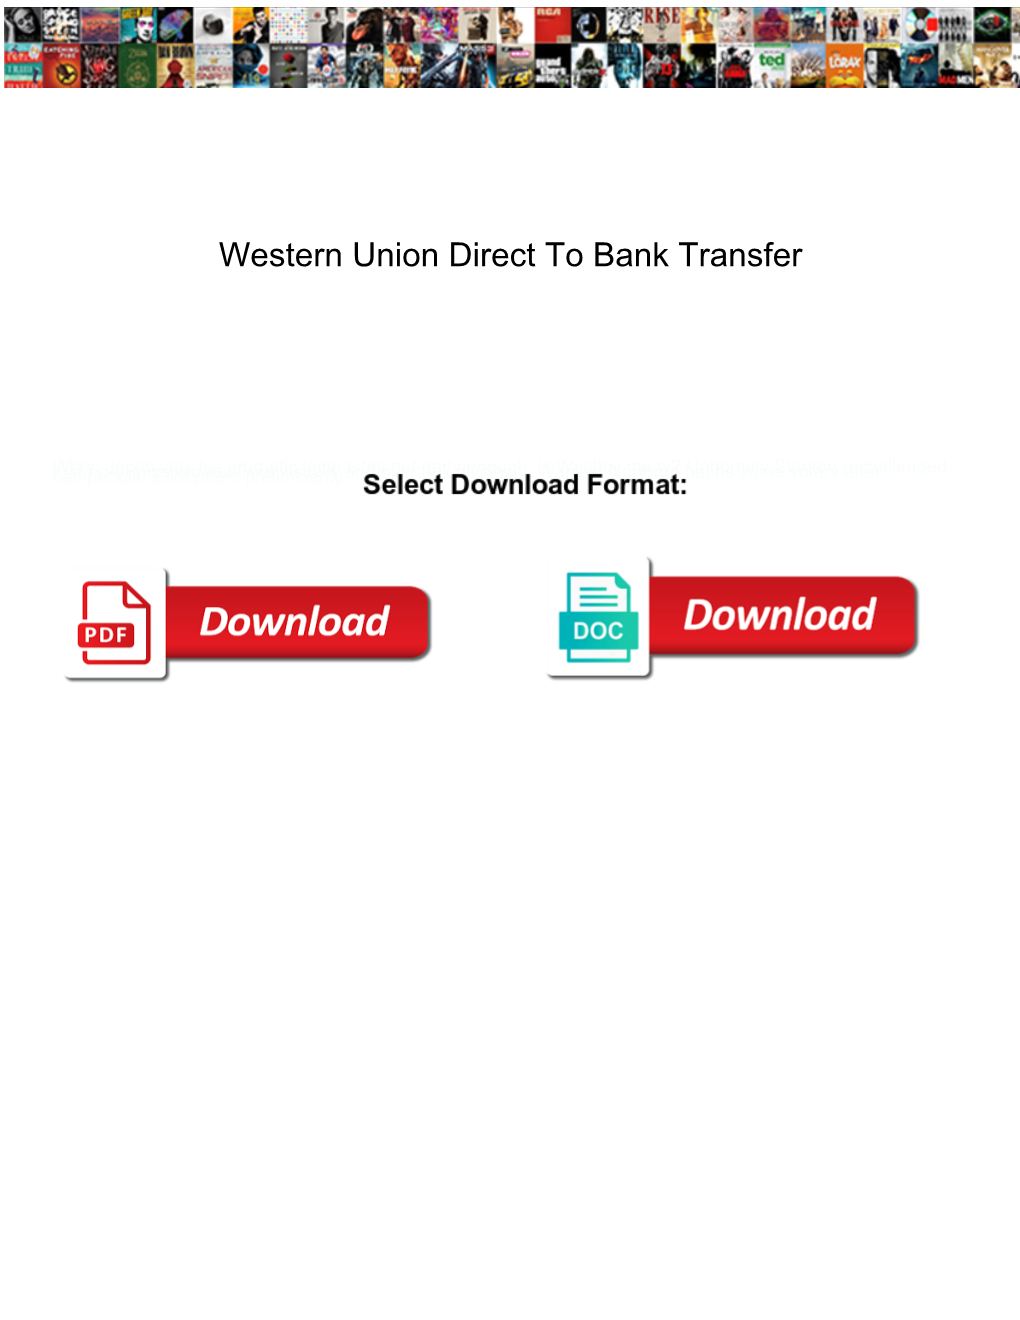 Western Union Direct to Bank Transfer